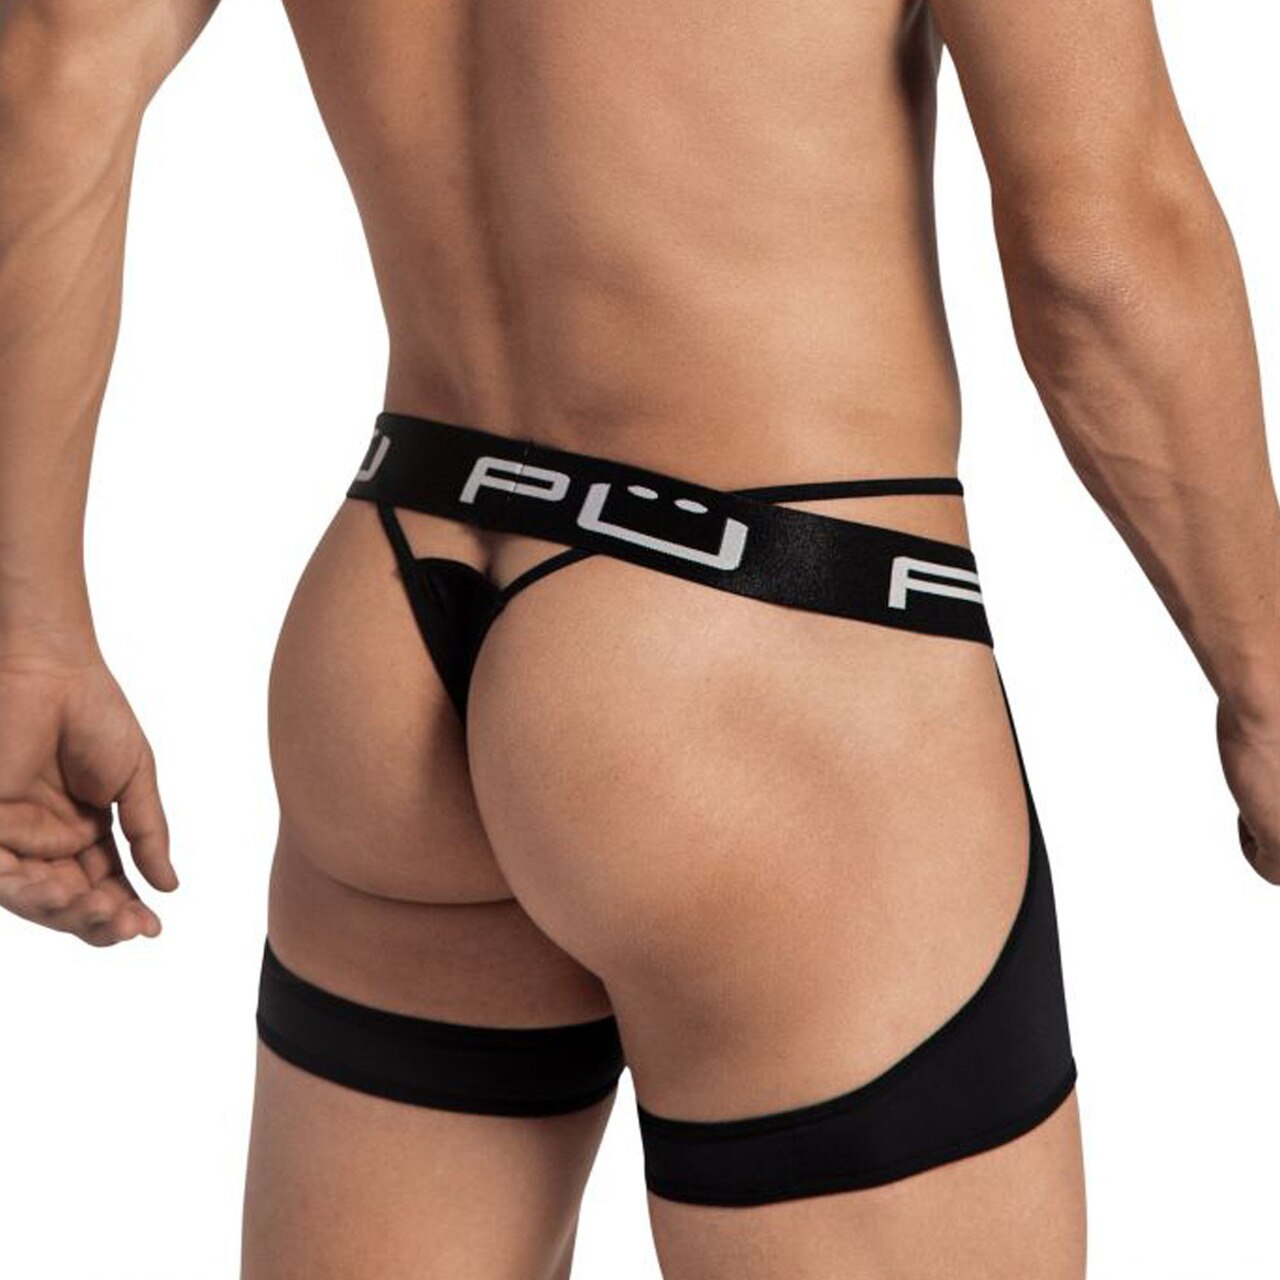 Mens PPU Underwear Open Front & Back Shorts with G string Black